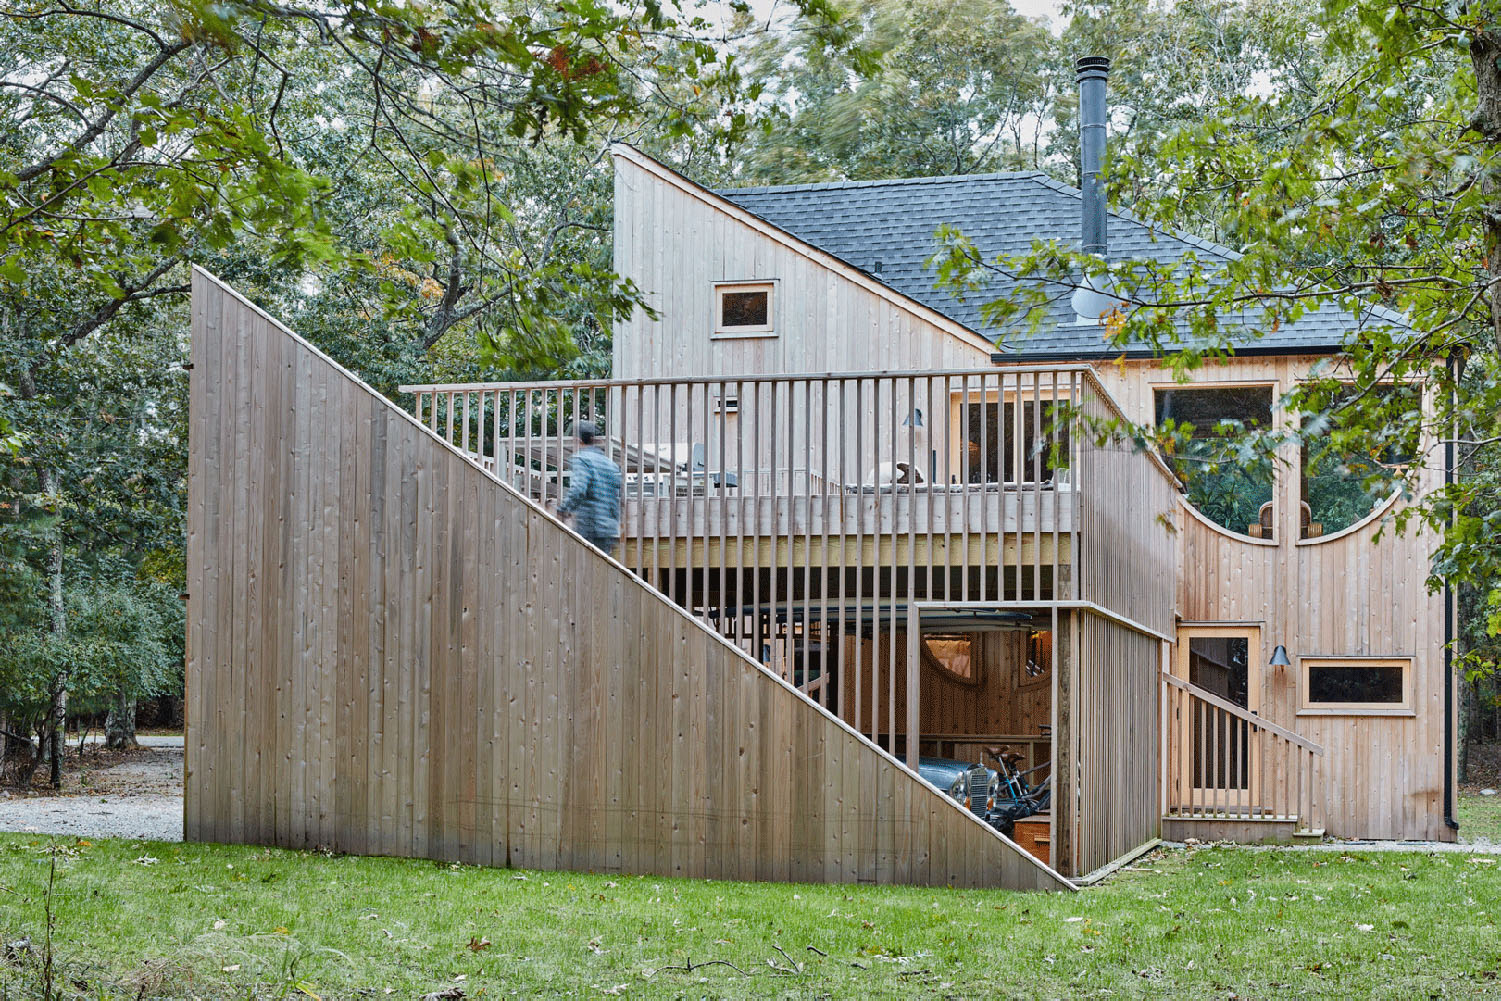 Wooden building with surrounding landscape designed by Andrew Geller